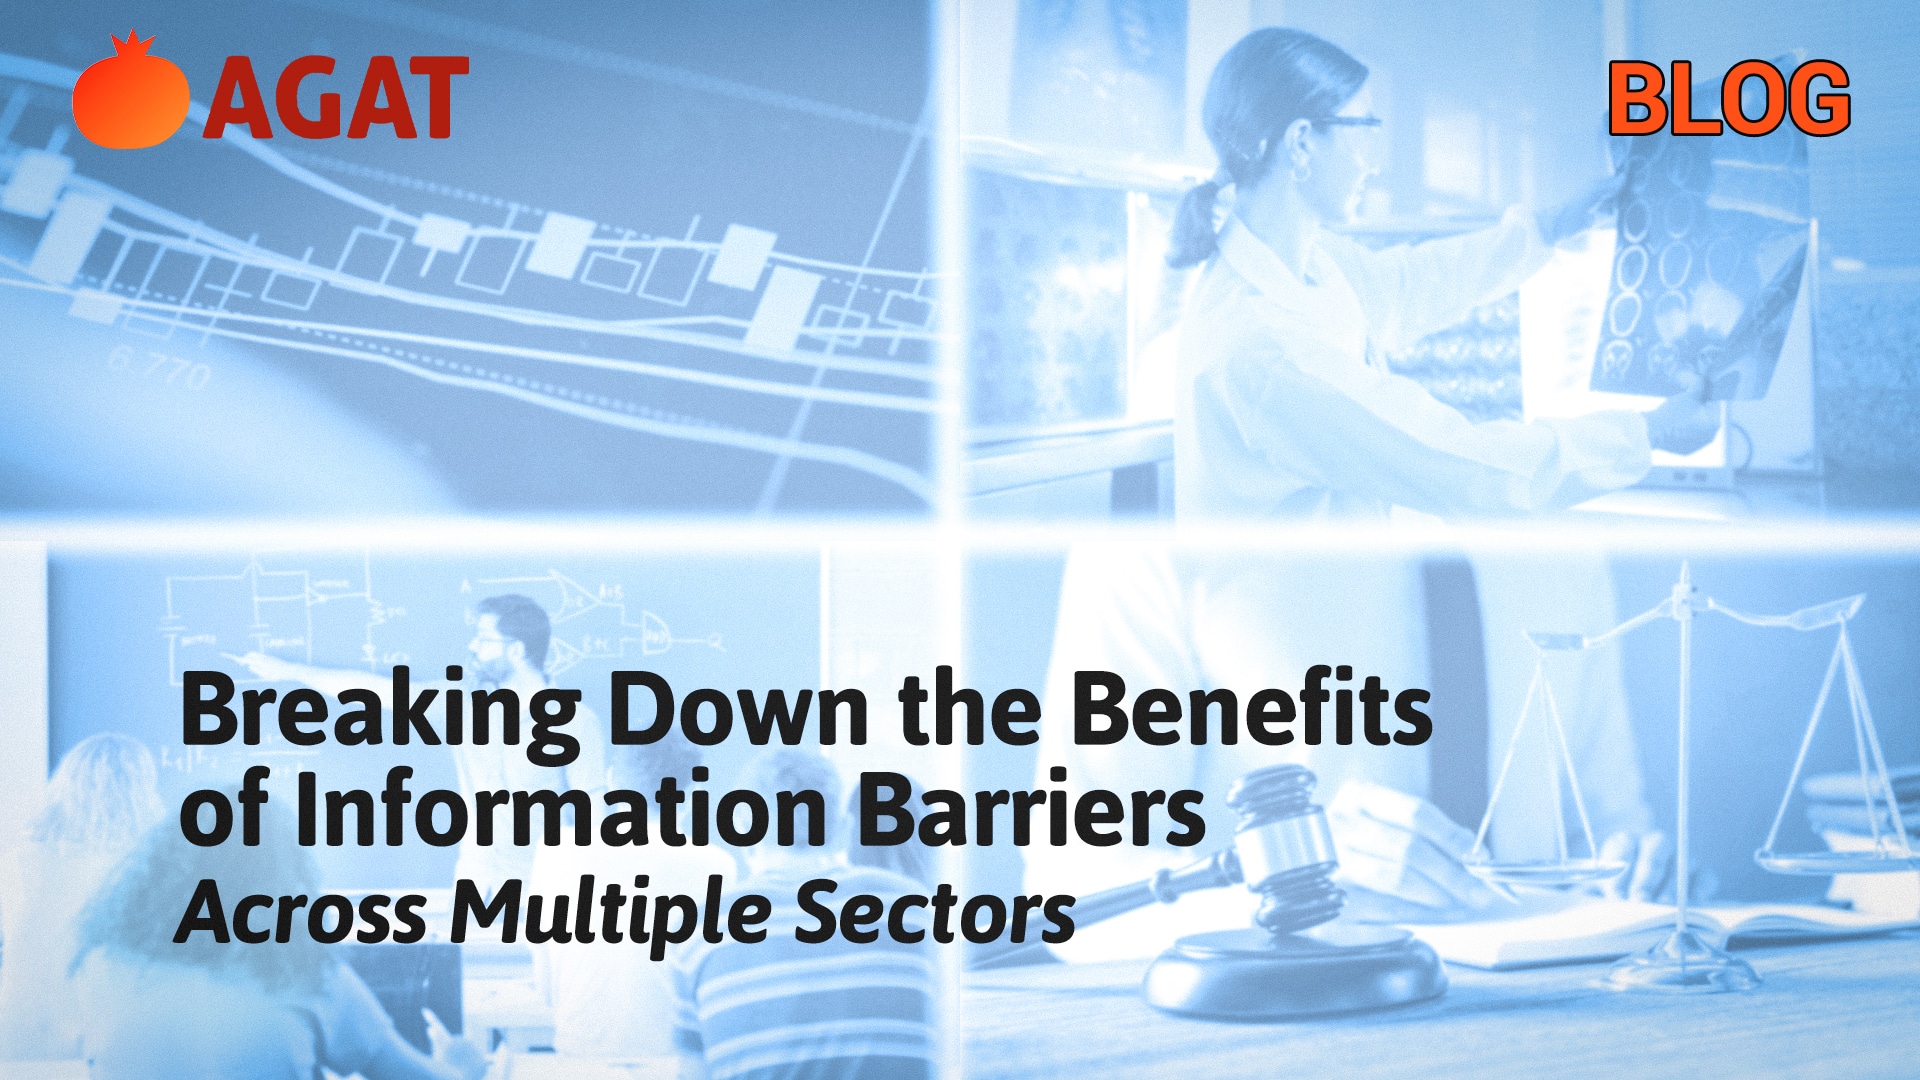 Breaking Down the Benefits of Information Barriers Across Multiple Sectors